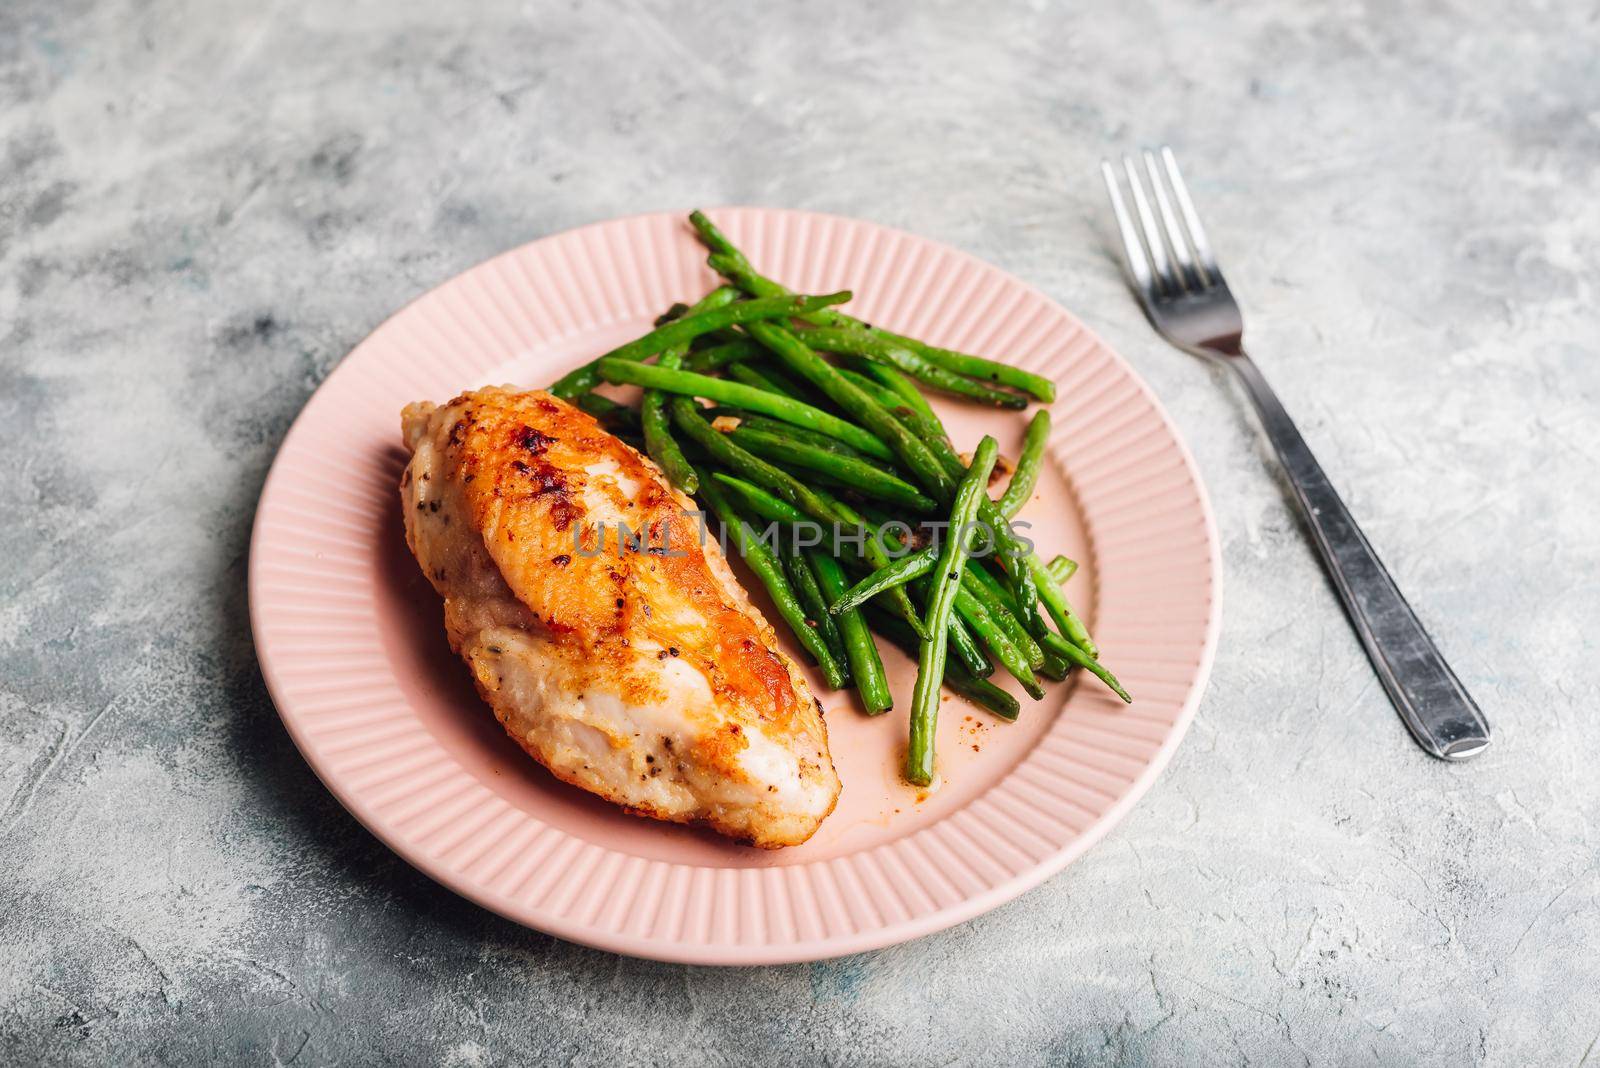 Baked Chicken Breast with Green Beans on Plate by Seva_blsv